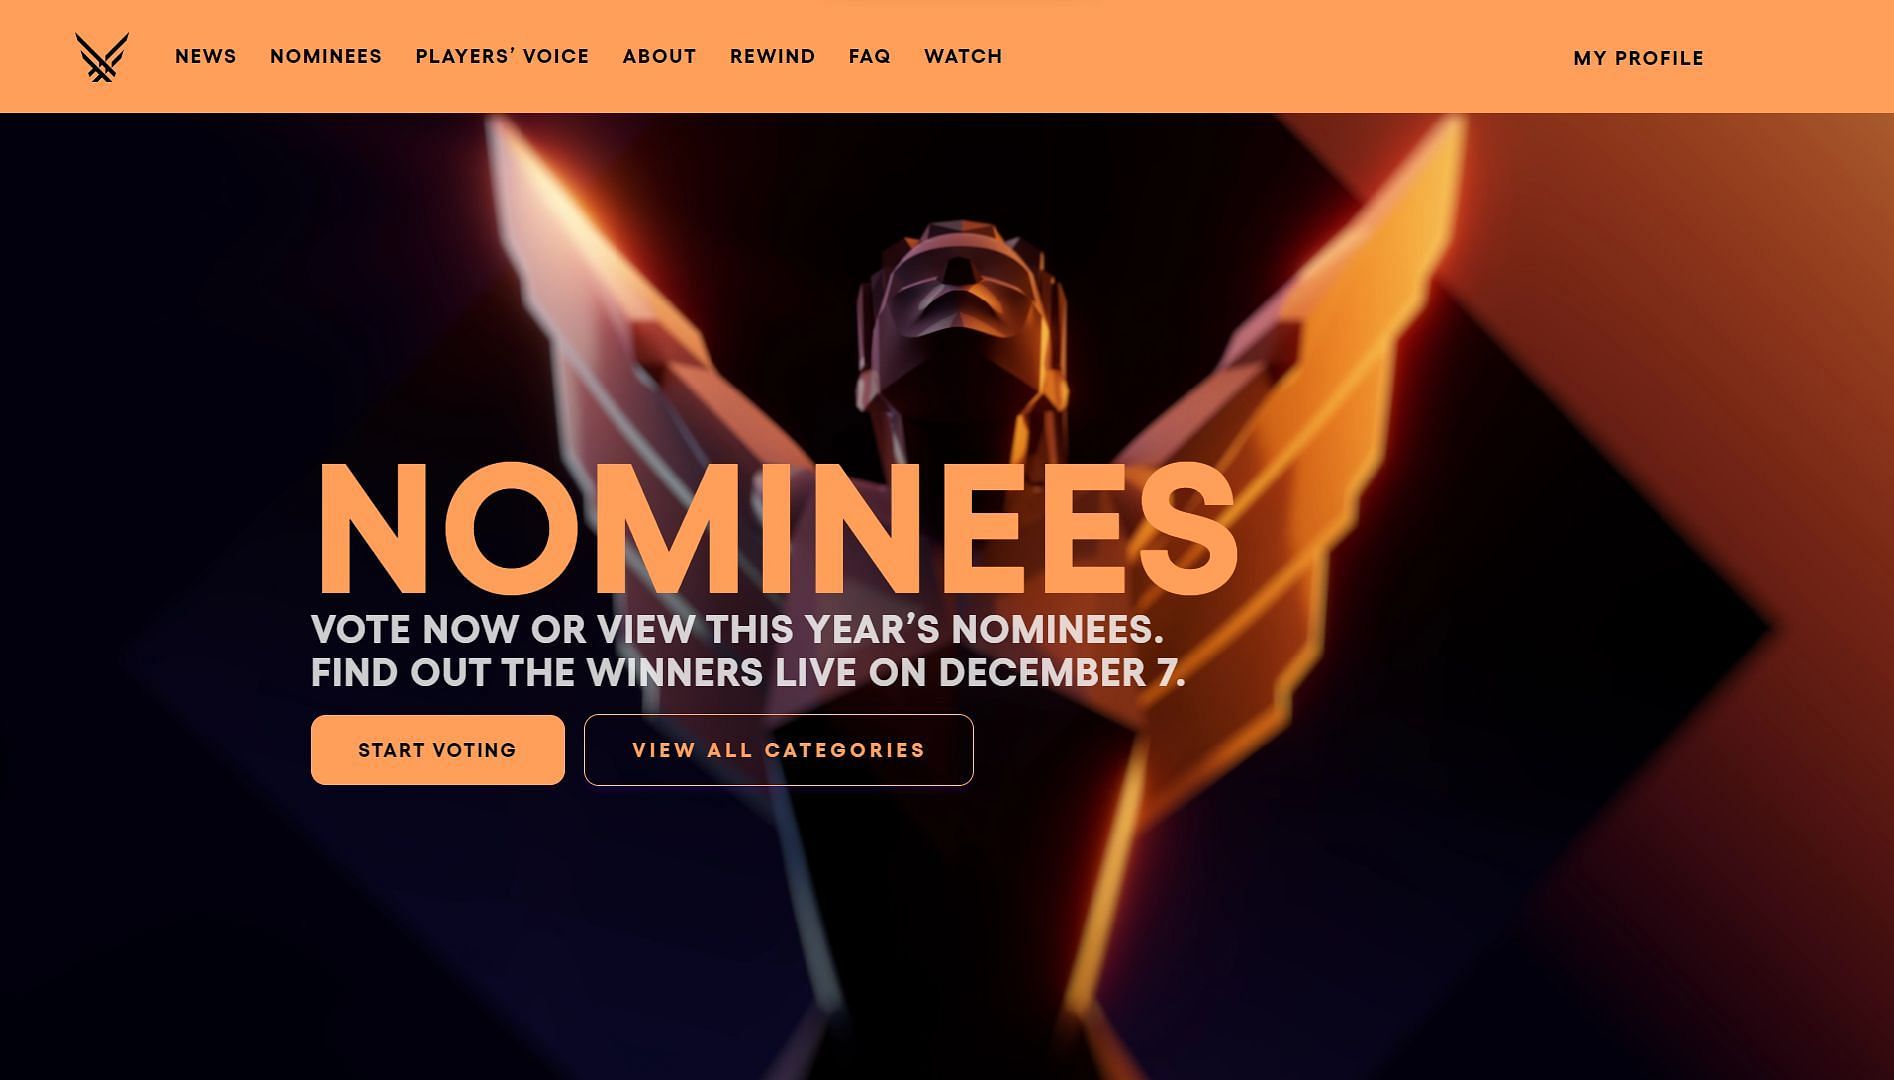 The Game Awards 2021: How to Watch, Nominees, Winners